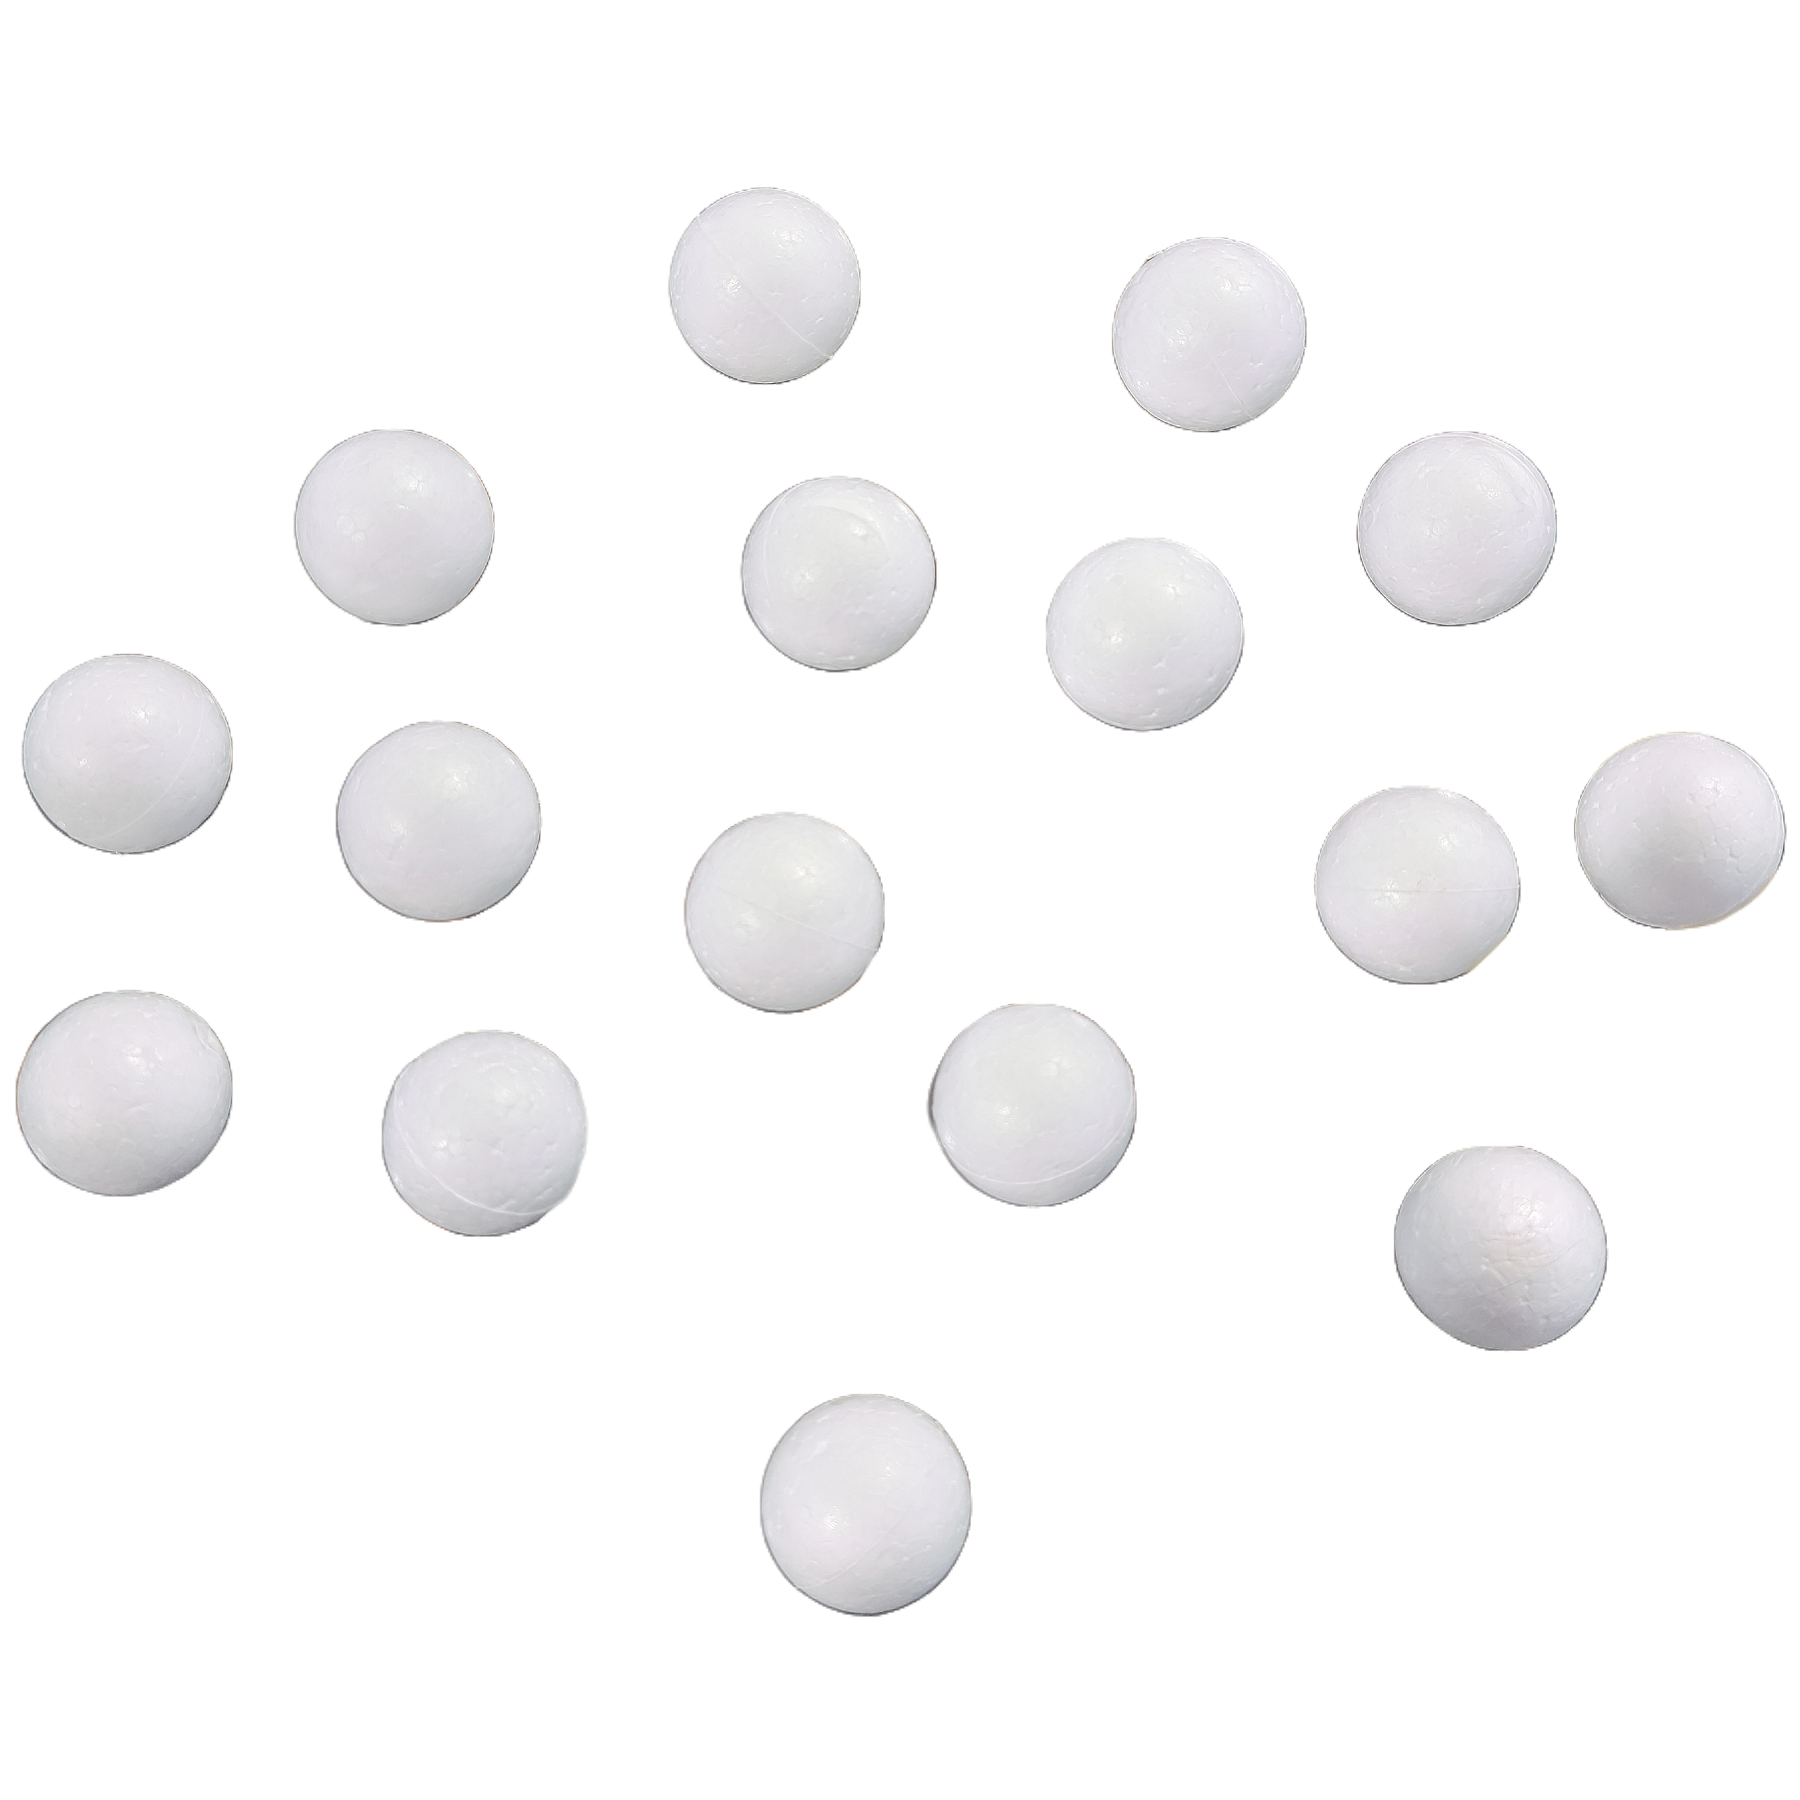 White Bead EPS Foam Ball Shapes - The Compleat Sculptor